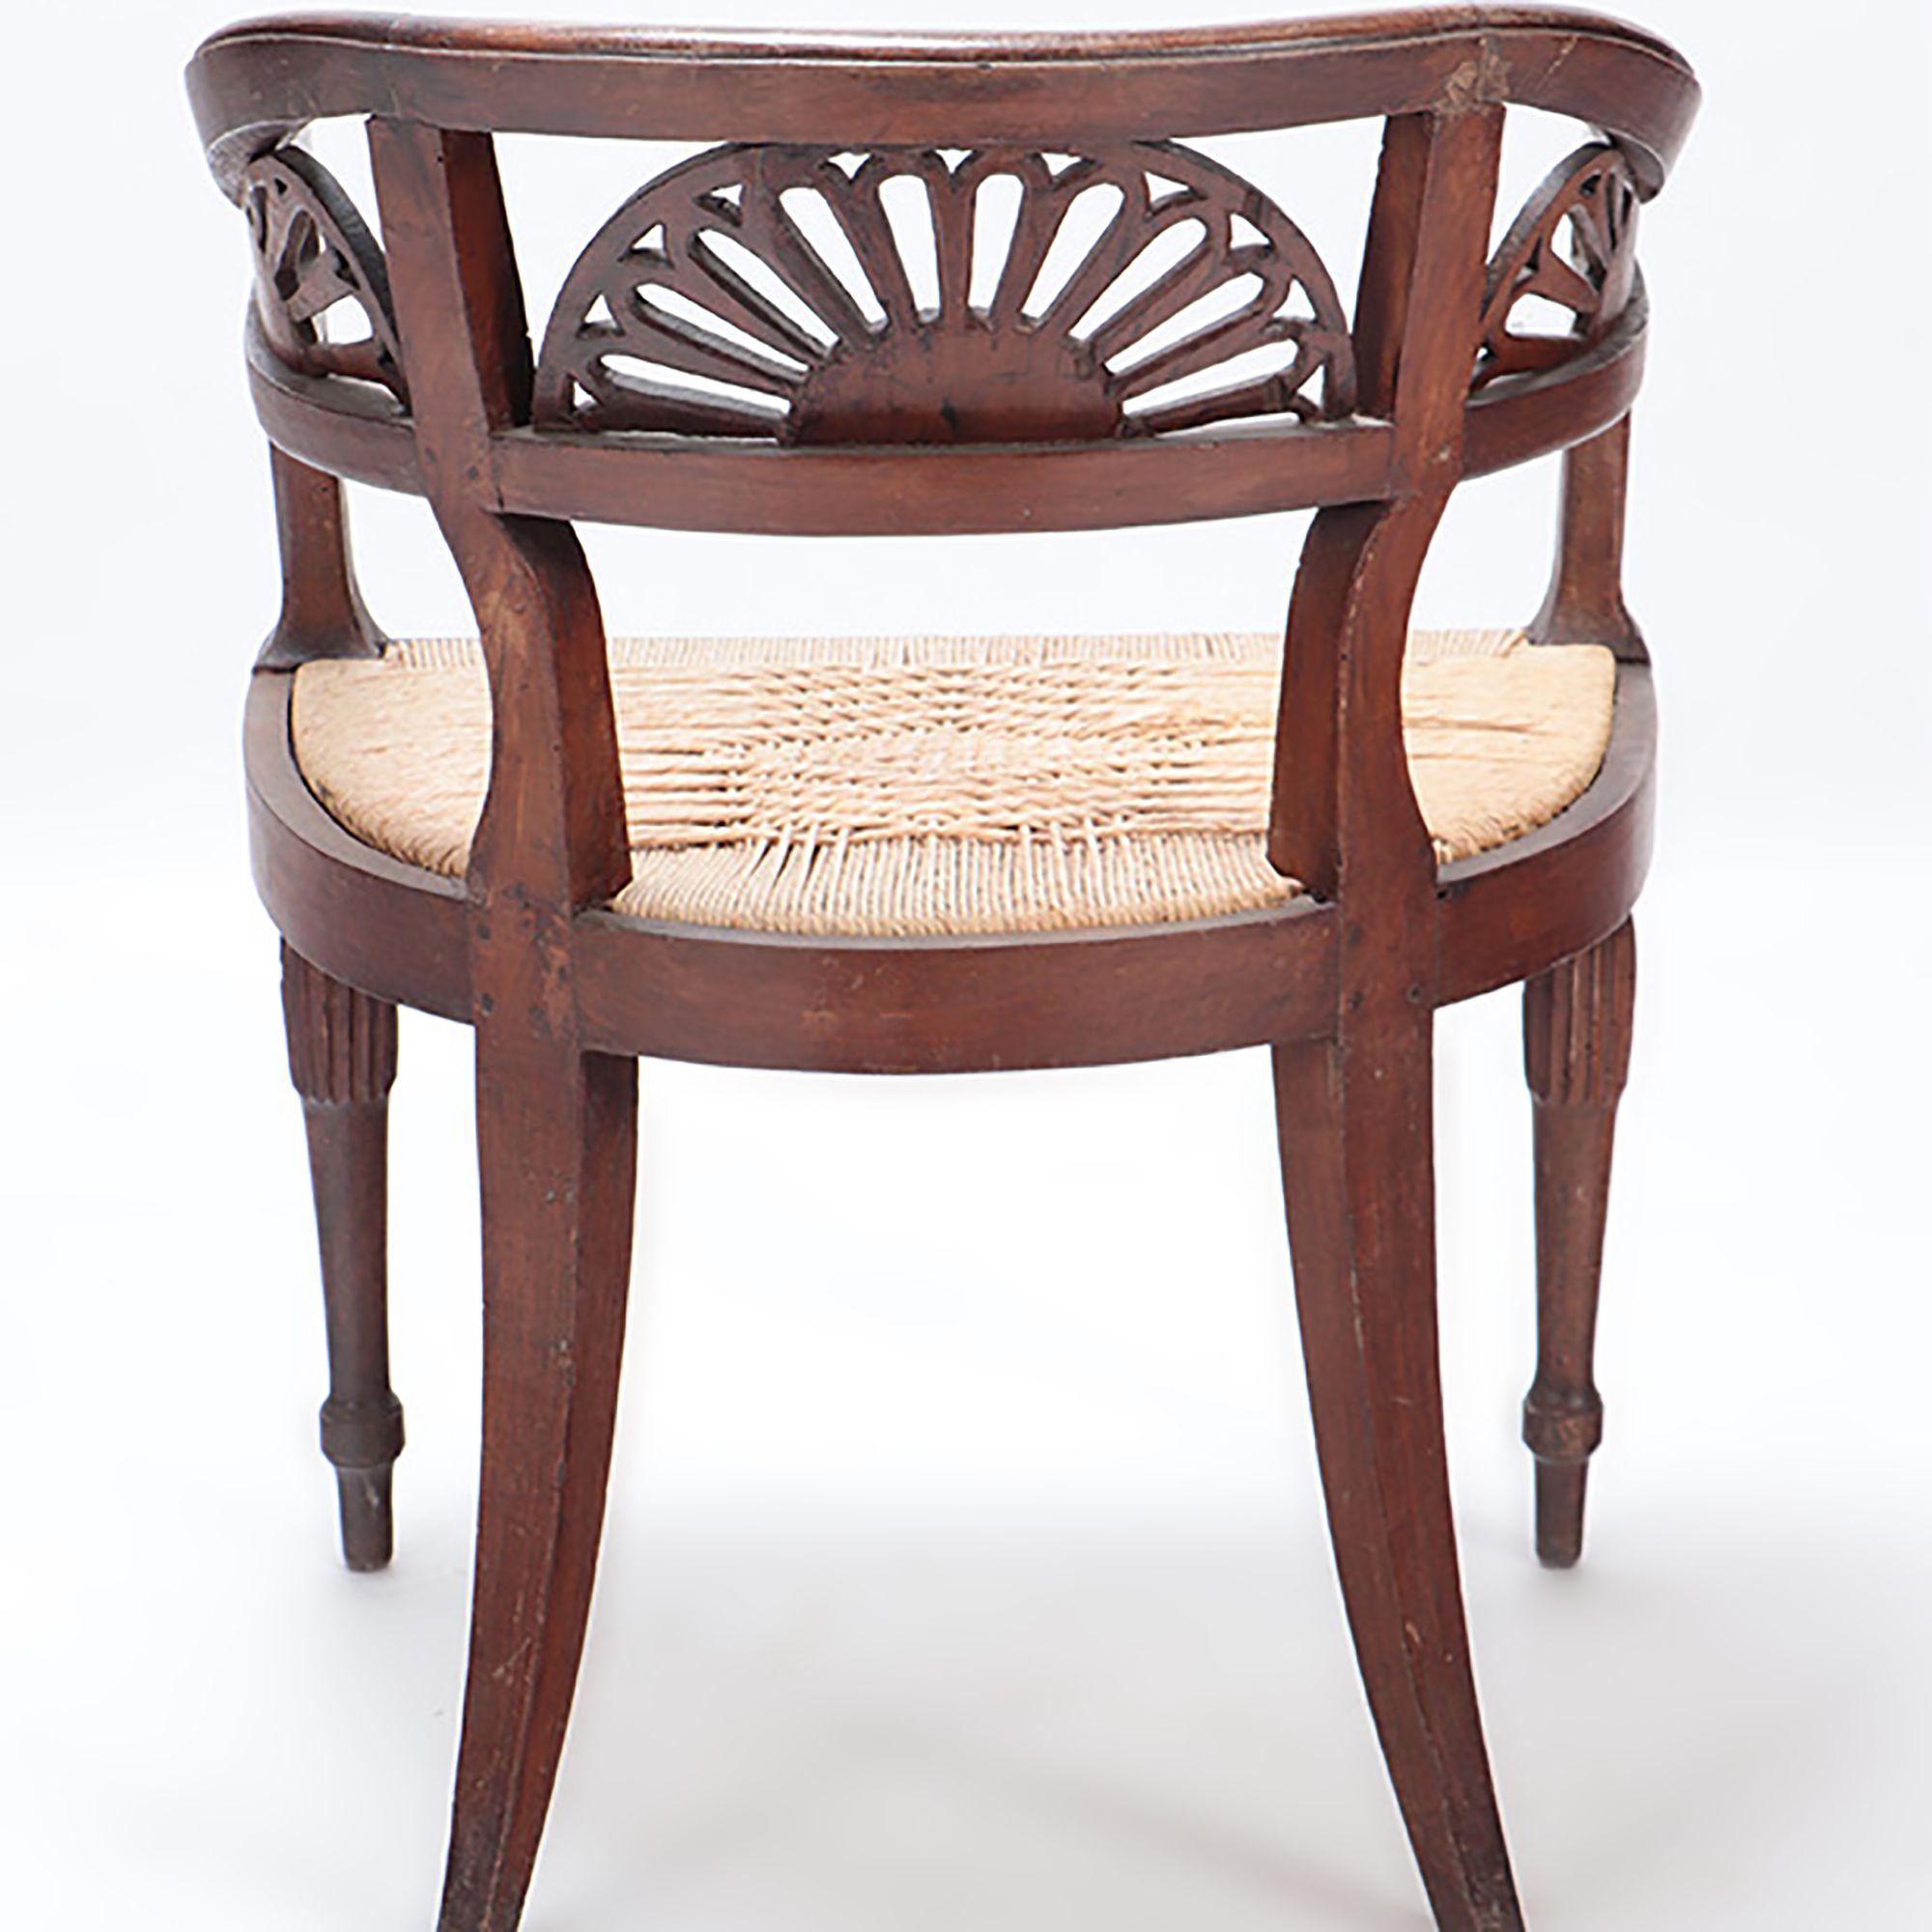 Pair of Italian Walnut Open Arm Chairs with Cord Seats, circa 1800 For Sale 7